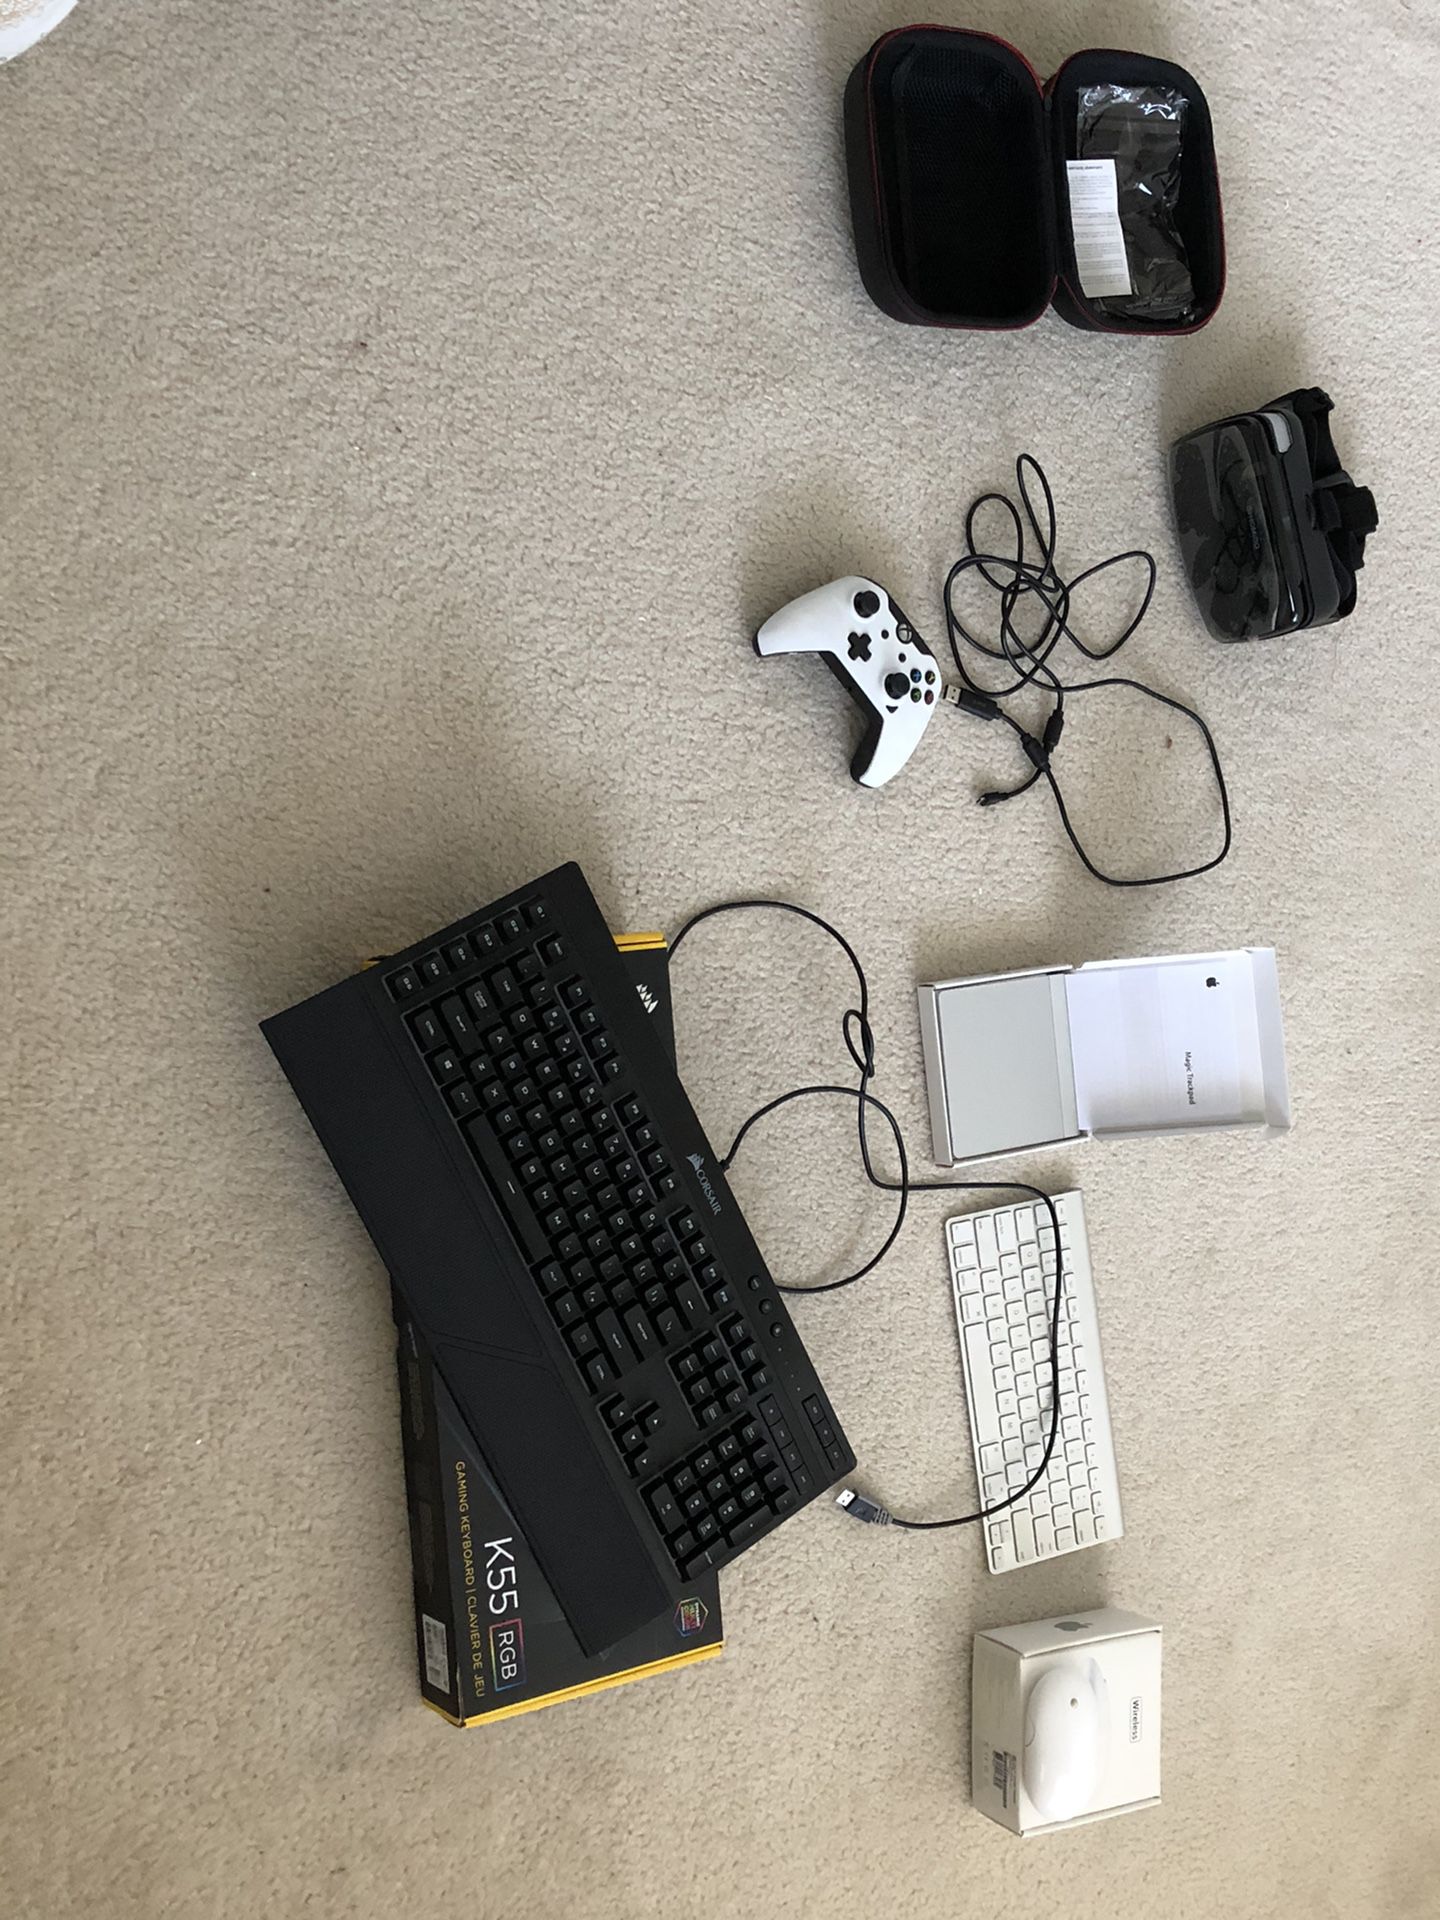 Selling Keyboards, Mice, Accessories